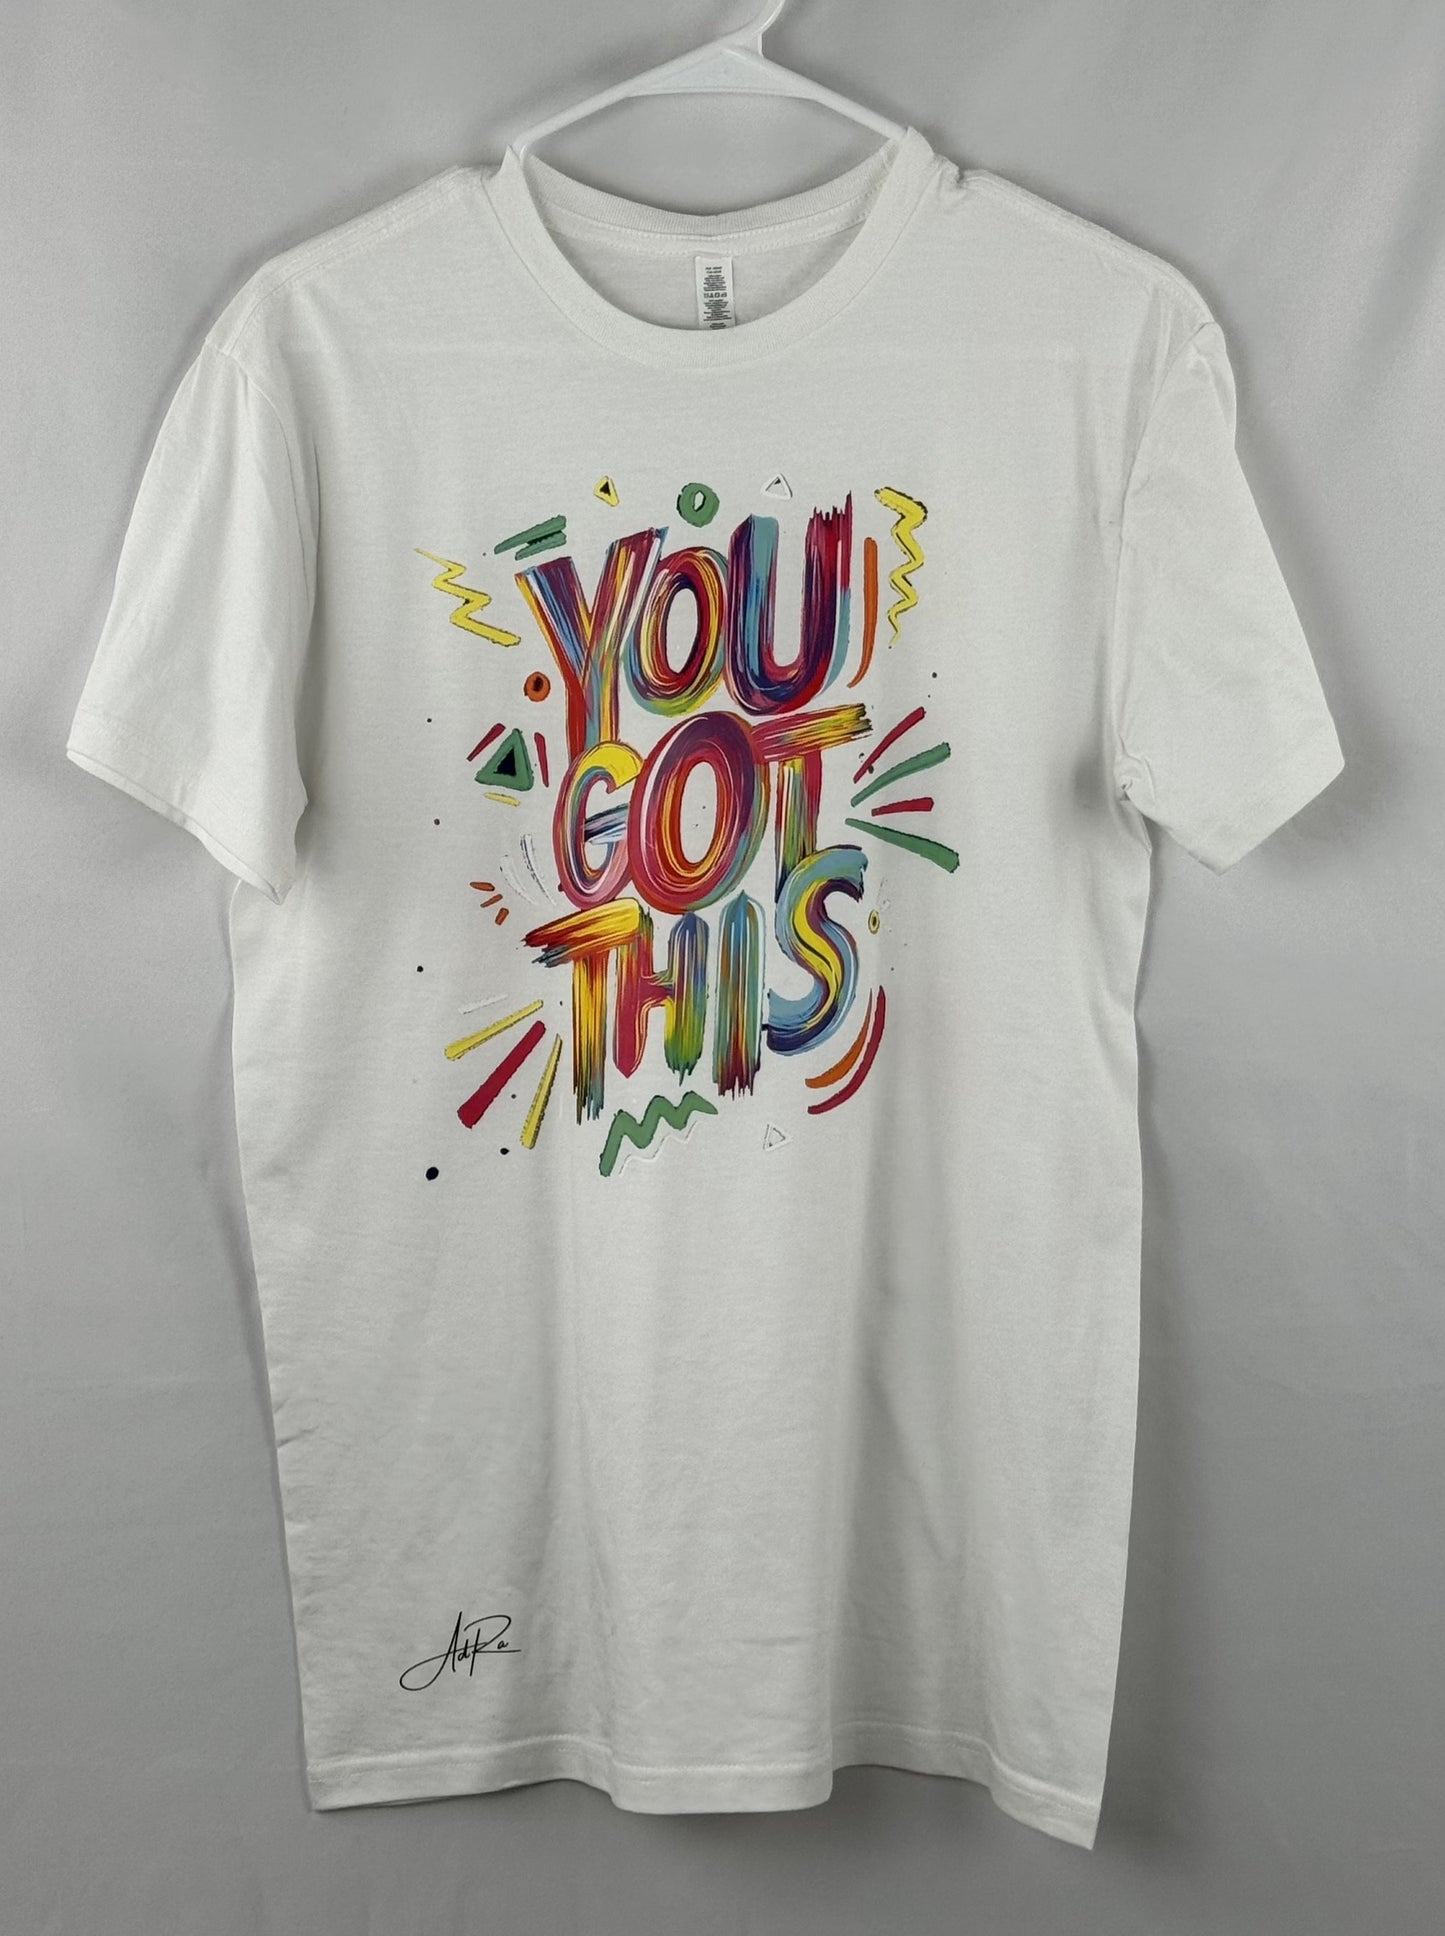 "YOU GOT THIS" Motivational Tee - Bold Affirmation from AdRa Apparel